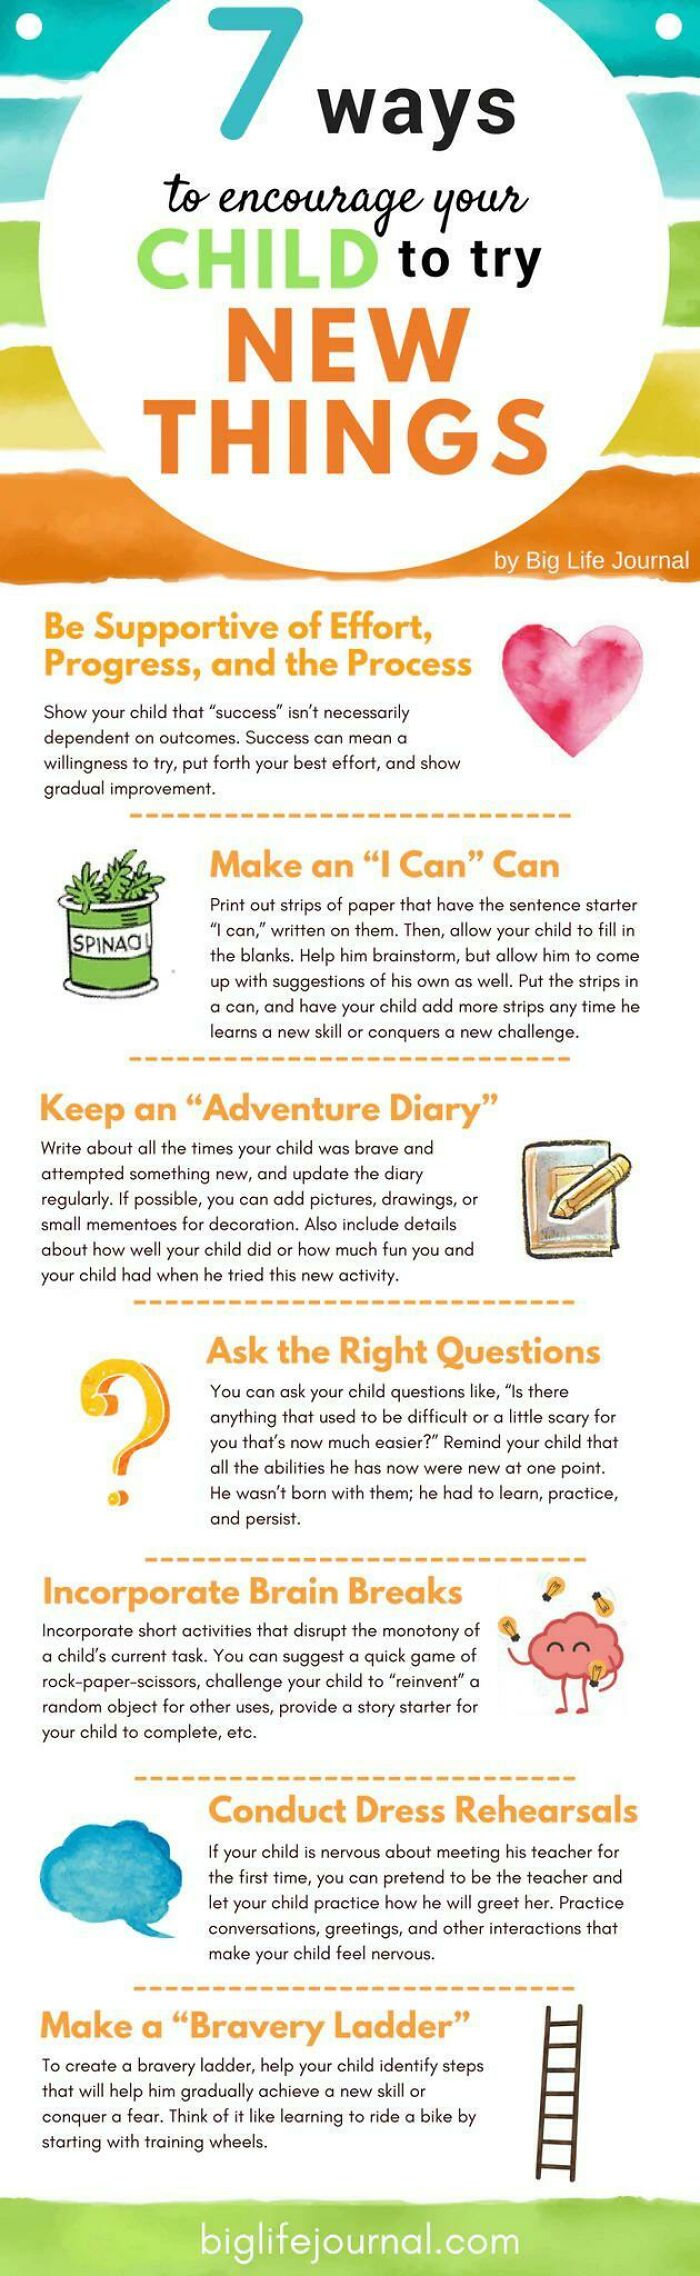 7 Ways To Encourage Your Child To Try New Things